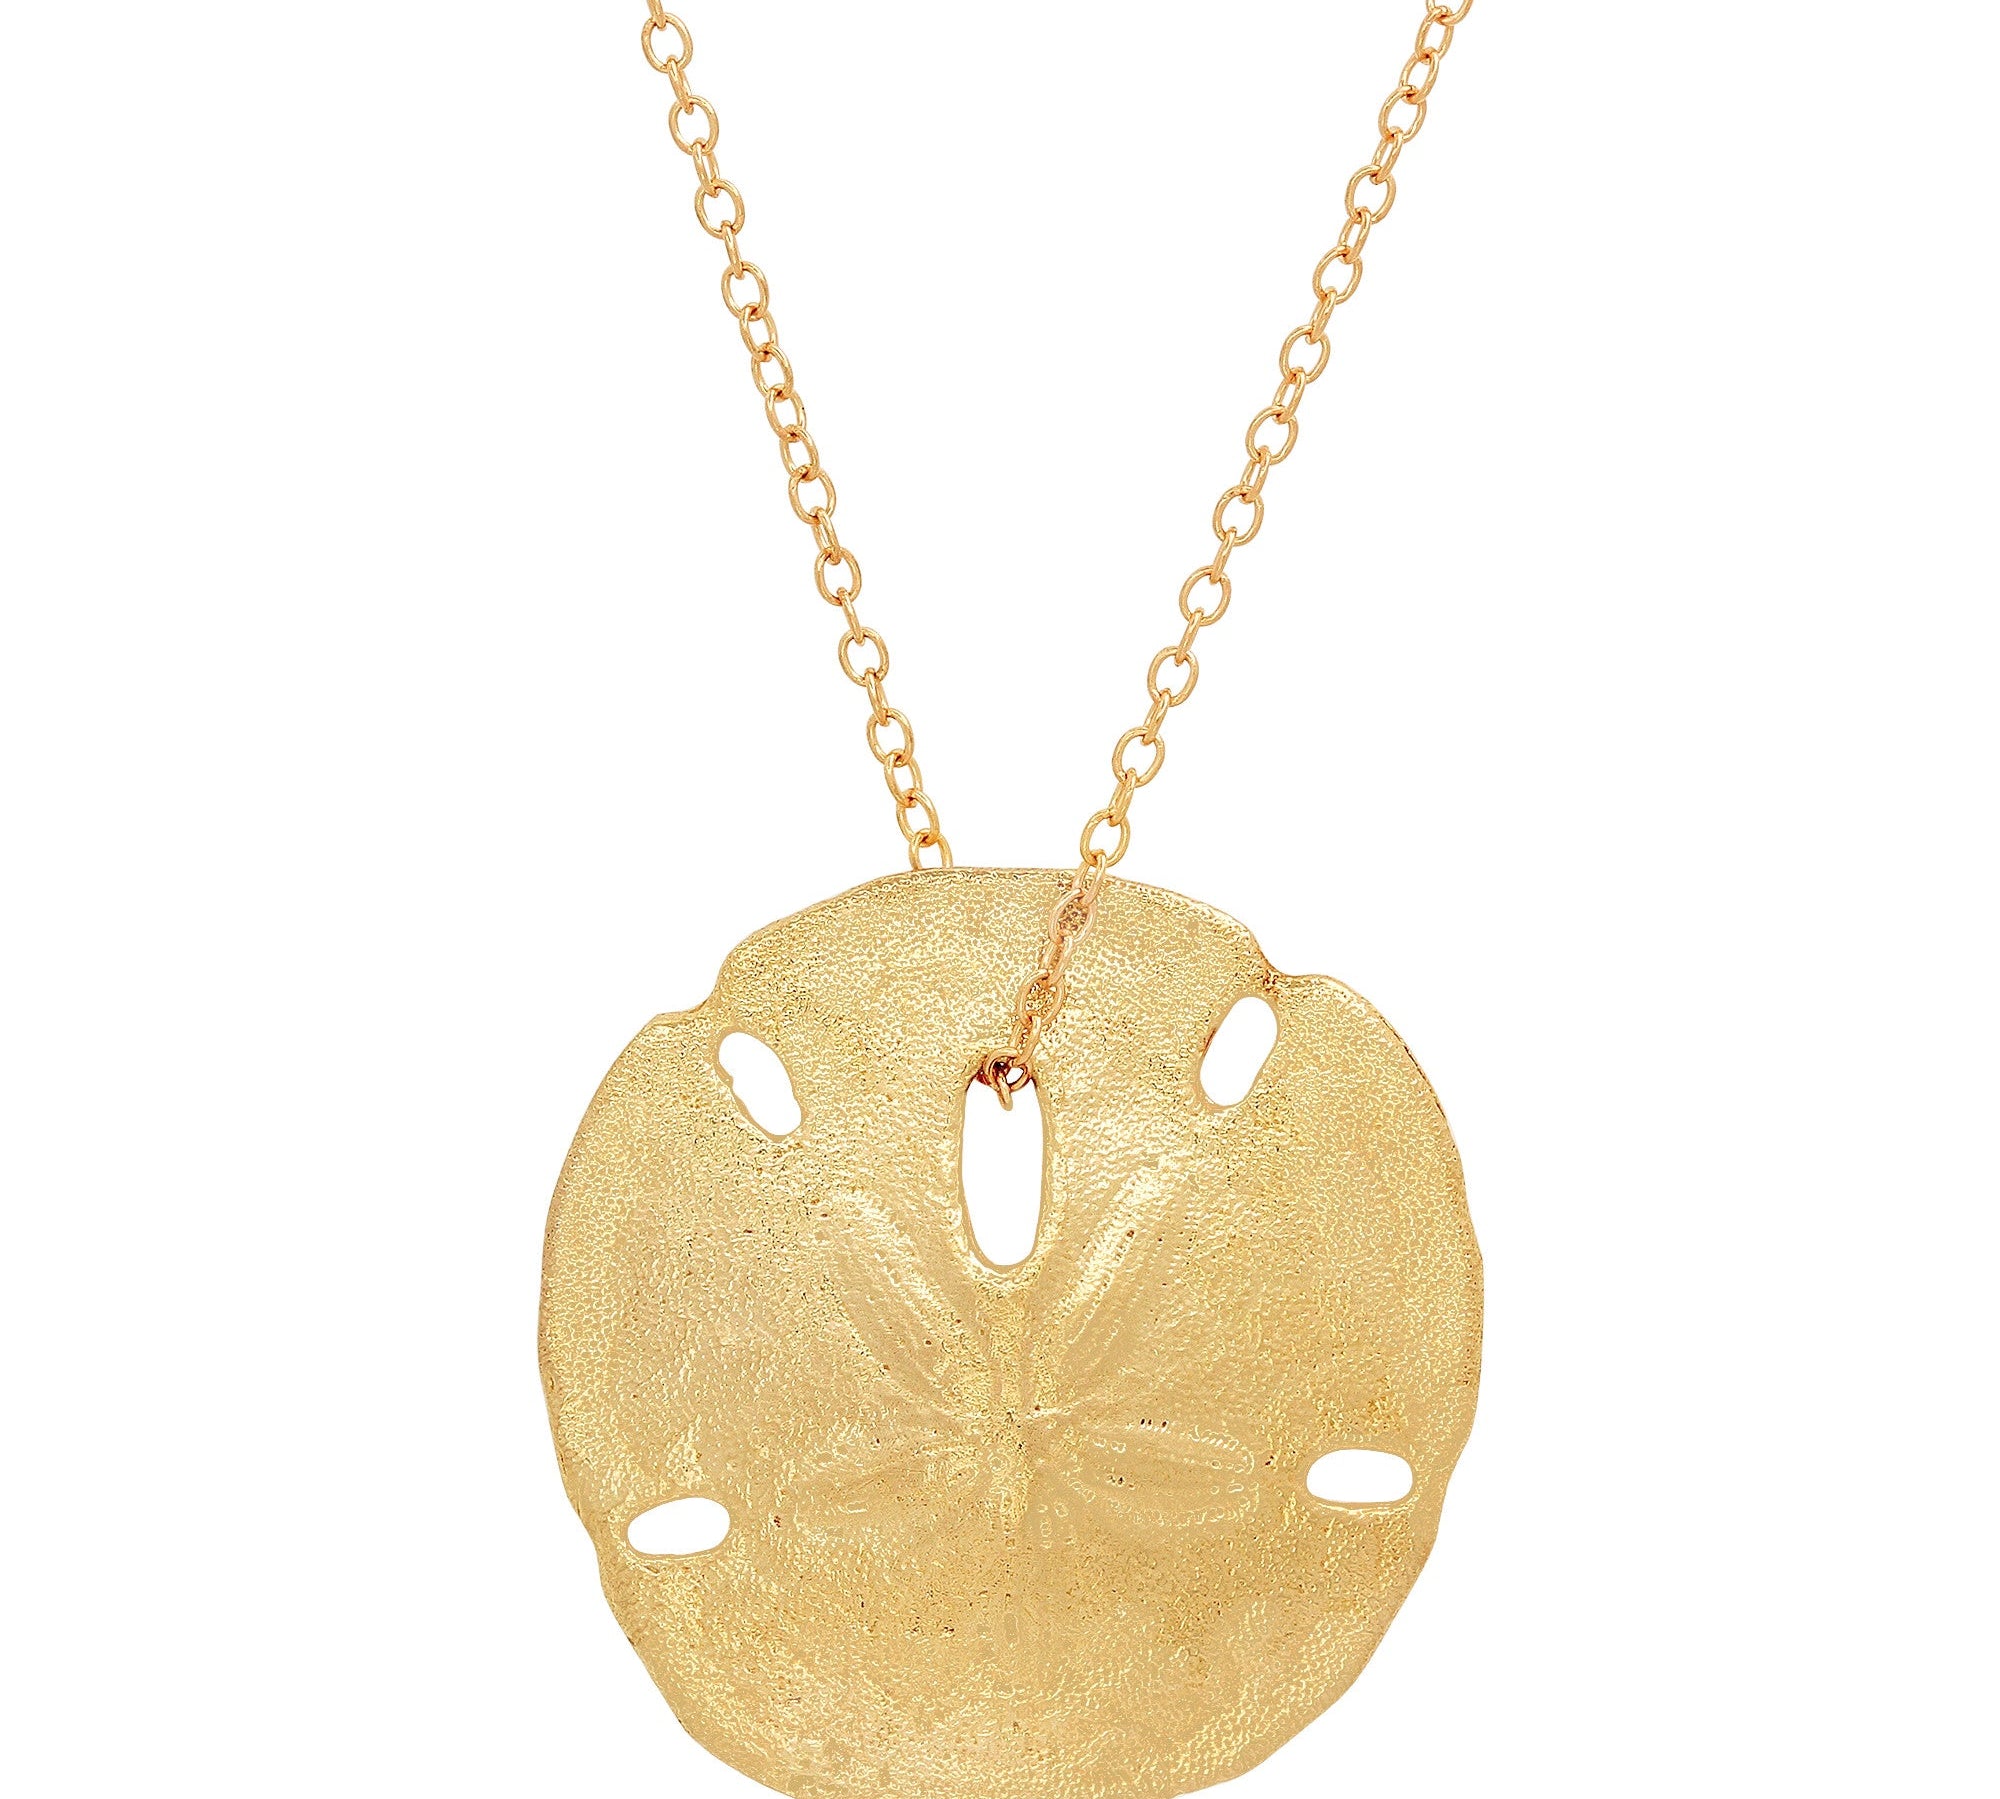 Large Sand Dollar Necklace Pendant Elisabeth Bell Jewelry Yellow Gold  